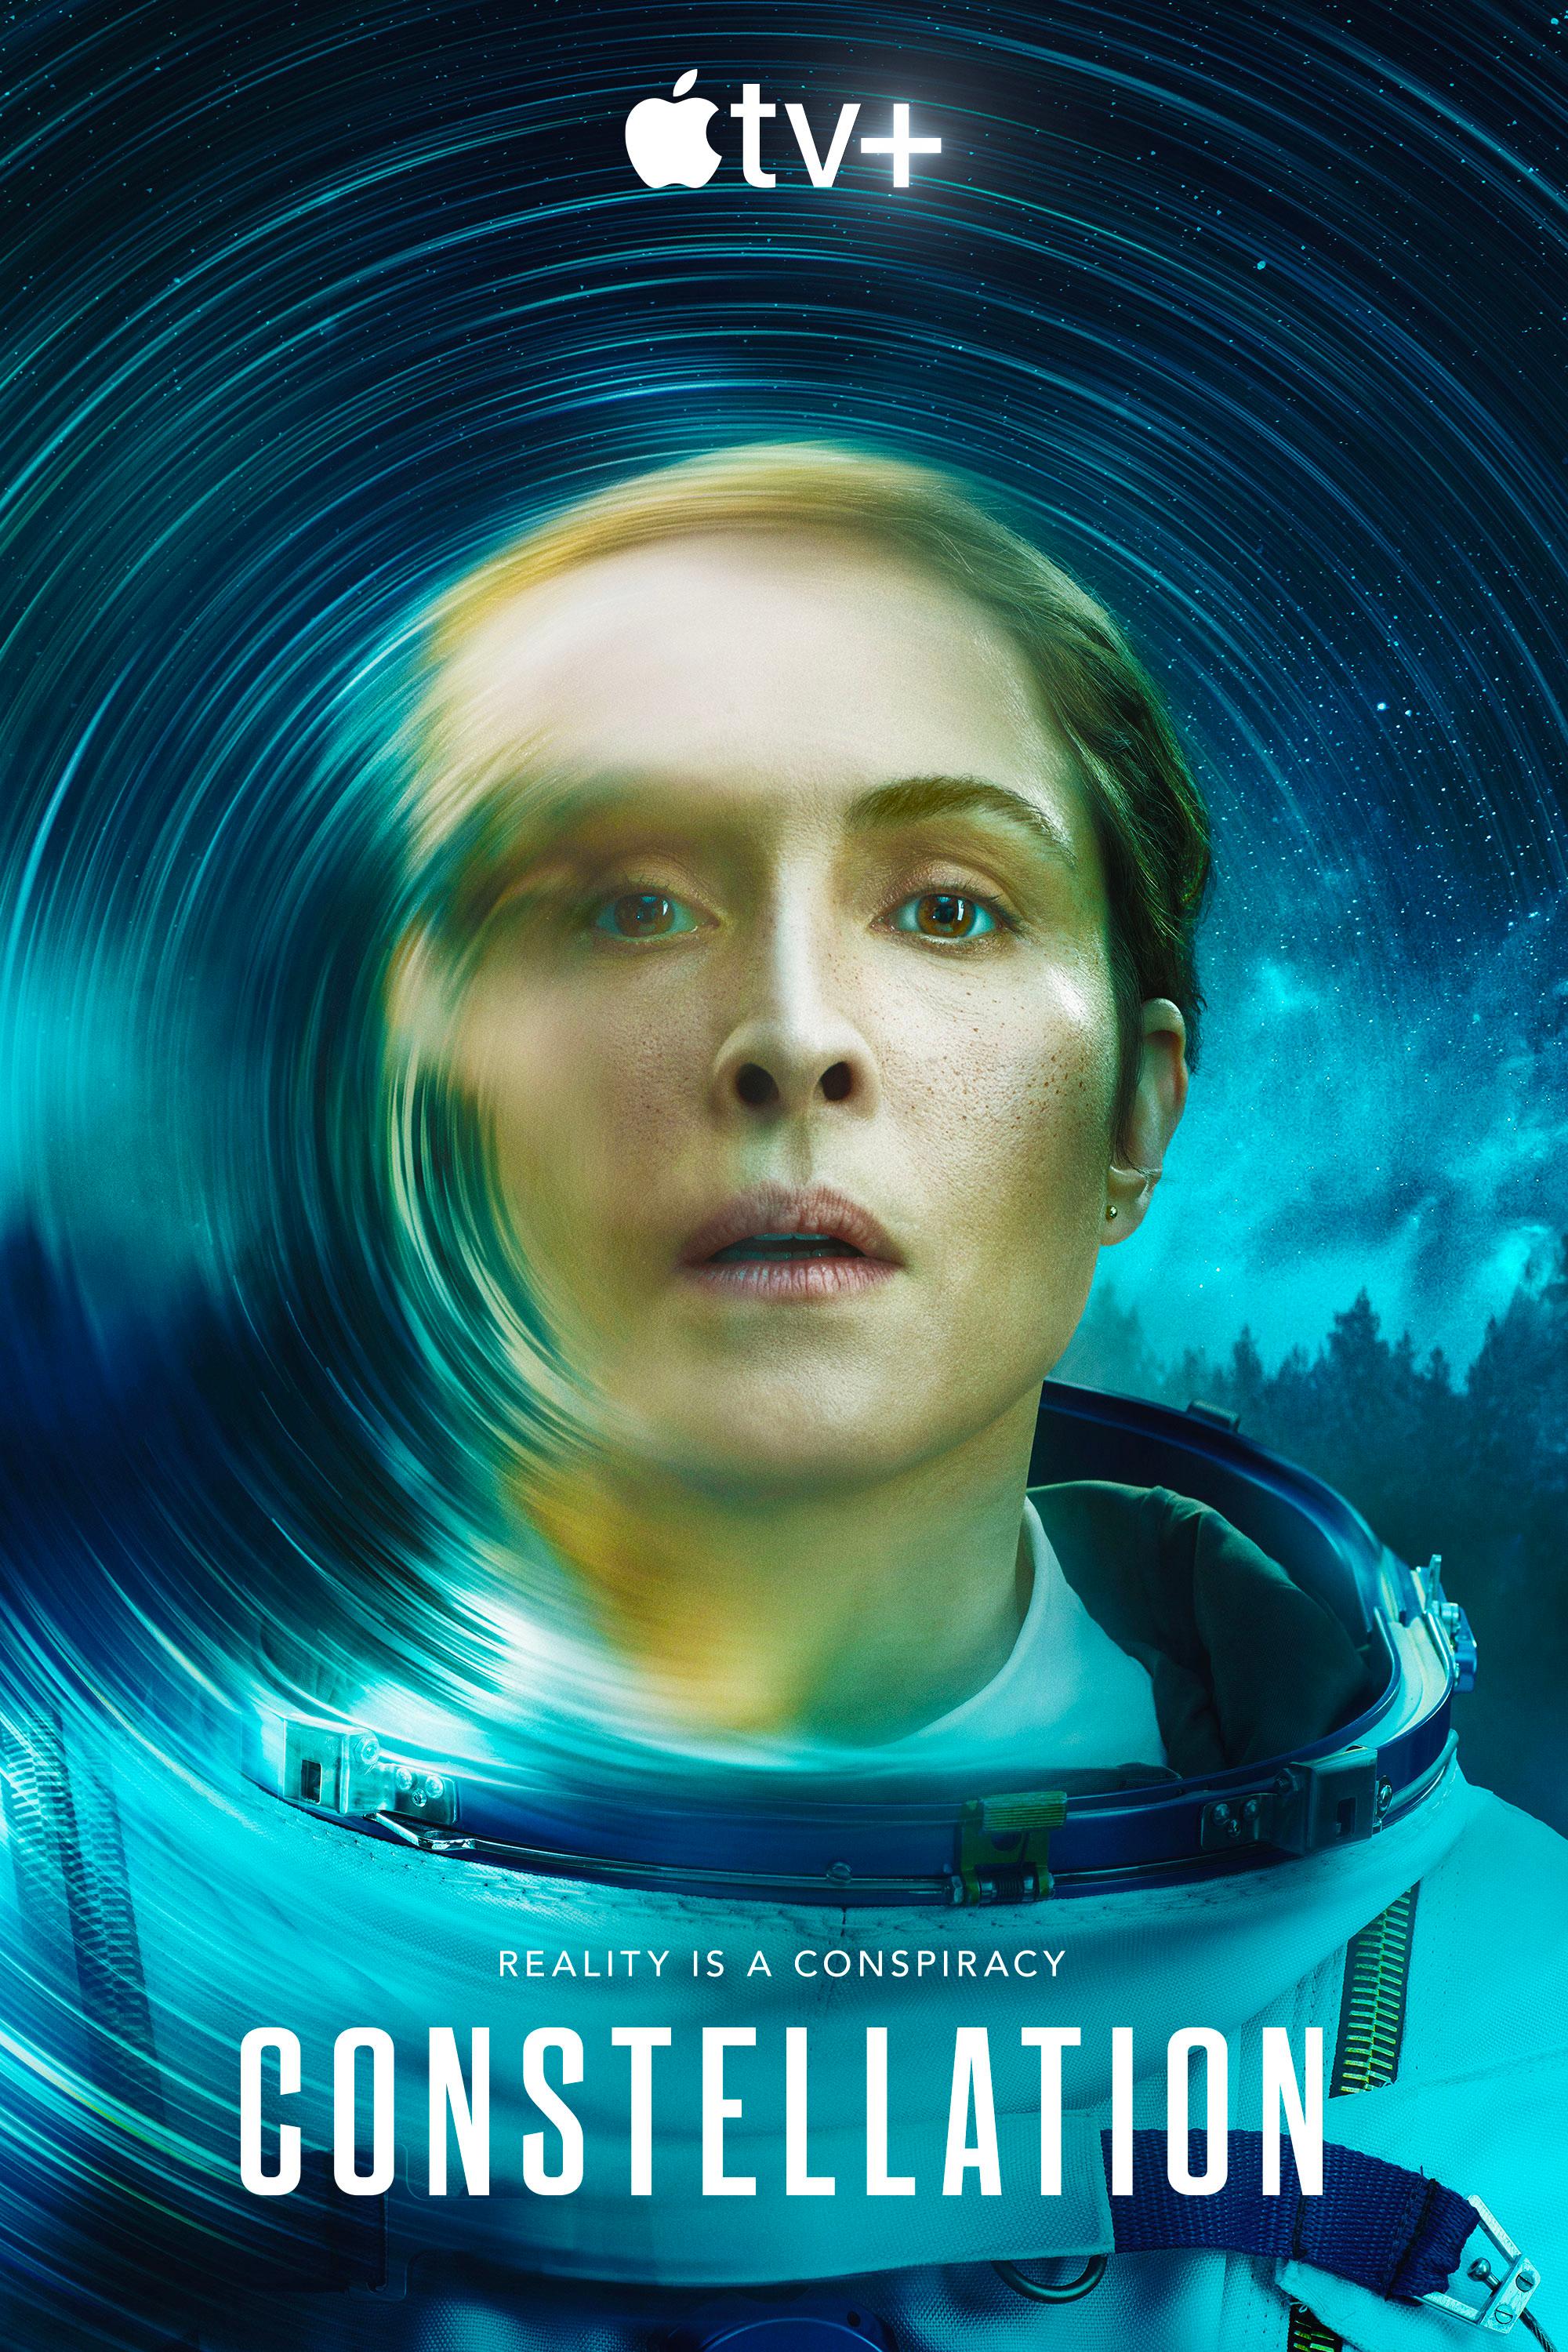 Constellation (February 21) - Streaming on Apple TV+Constellation is a riveting psychological drama series featuring Noomi Rapace as the lead character, Jo, an astronaut who returns to Earth after a devastating incident in space. Back home, she faces a puzzling reality where essential parts of her life seem to have vanished. Struggling with broken memories and alarming findings, she embarks on an urgent mission to discover what truly happened.